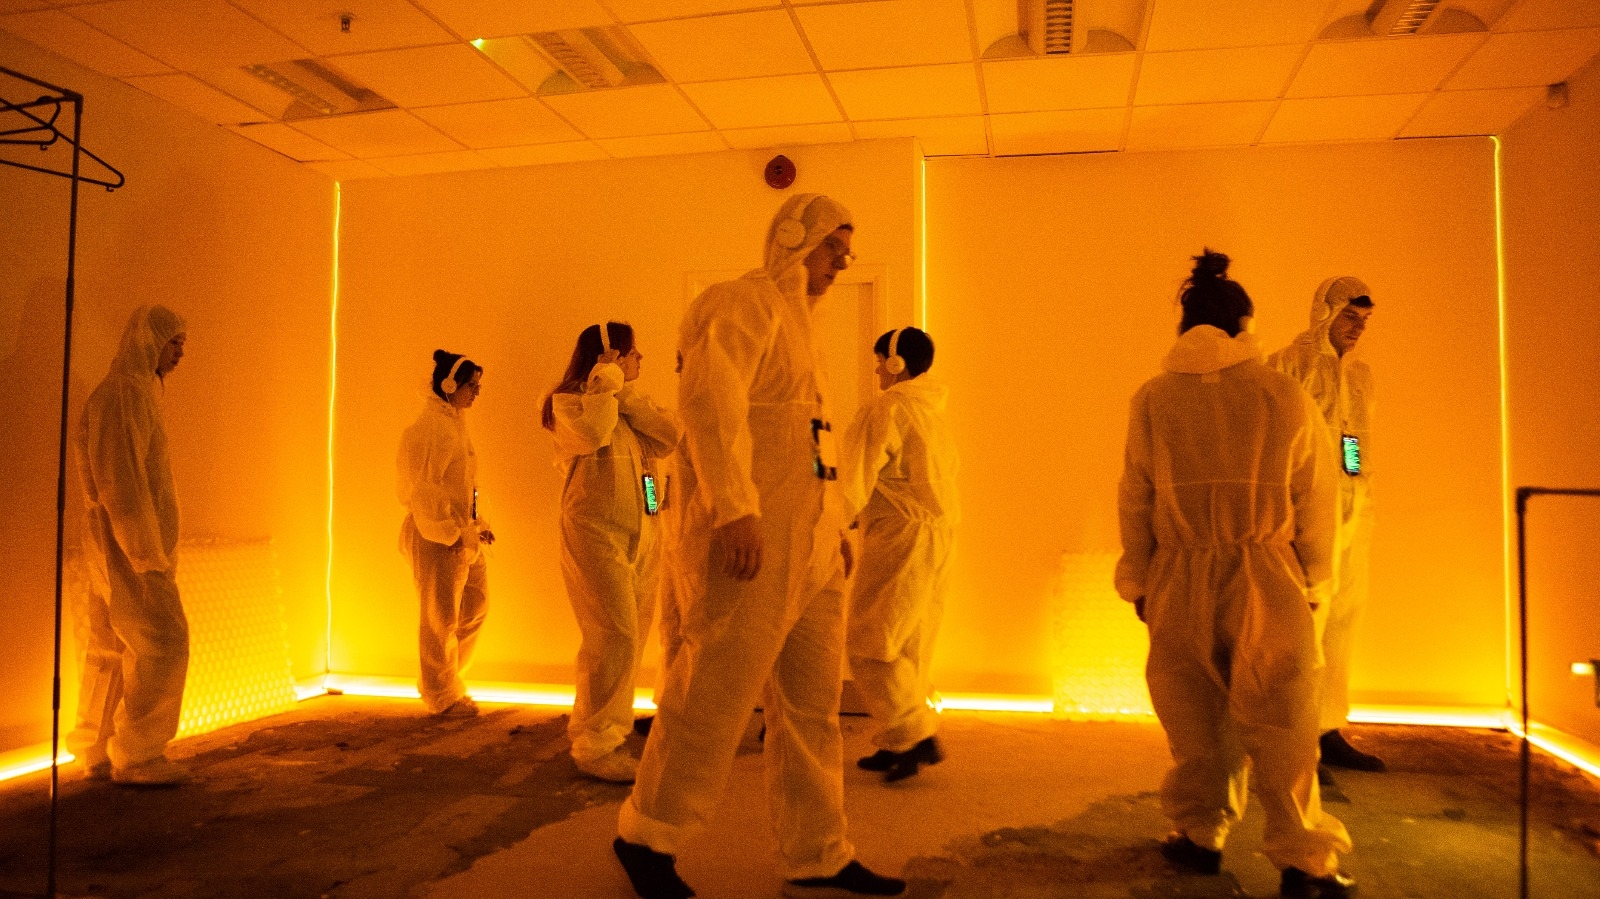 A color photograph of seven persons walking around in white disposable overalls and headphones in an orange-lit windowless room.